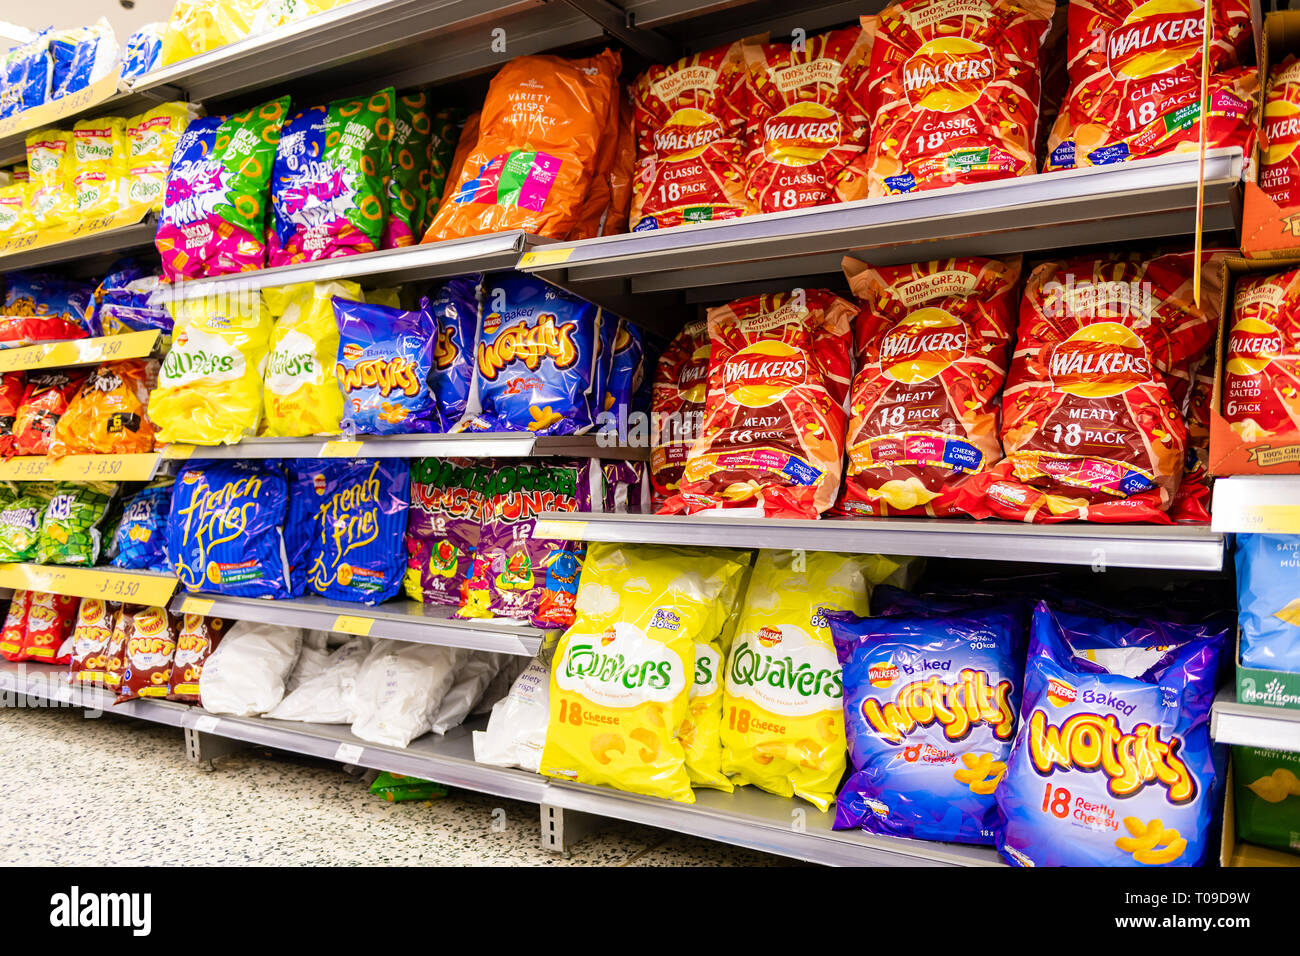 Crisps and snacks for sale in a supermarket, UK. Stock Photo